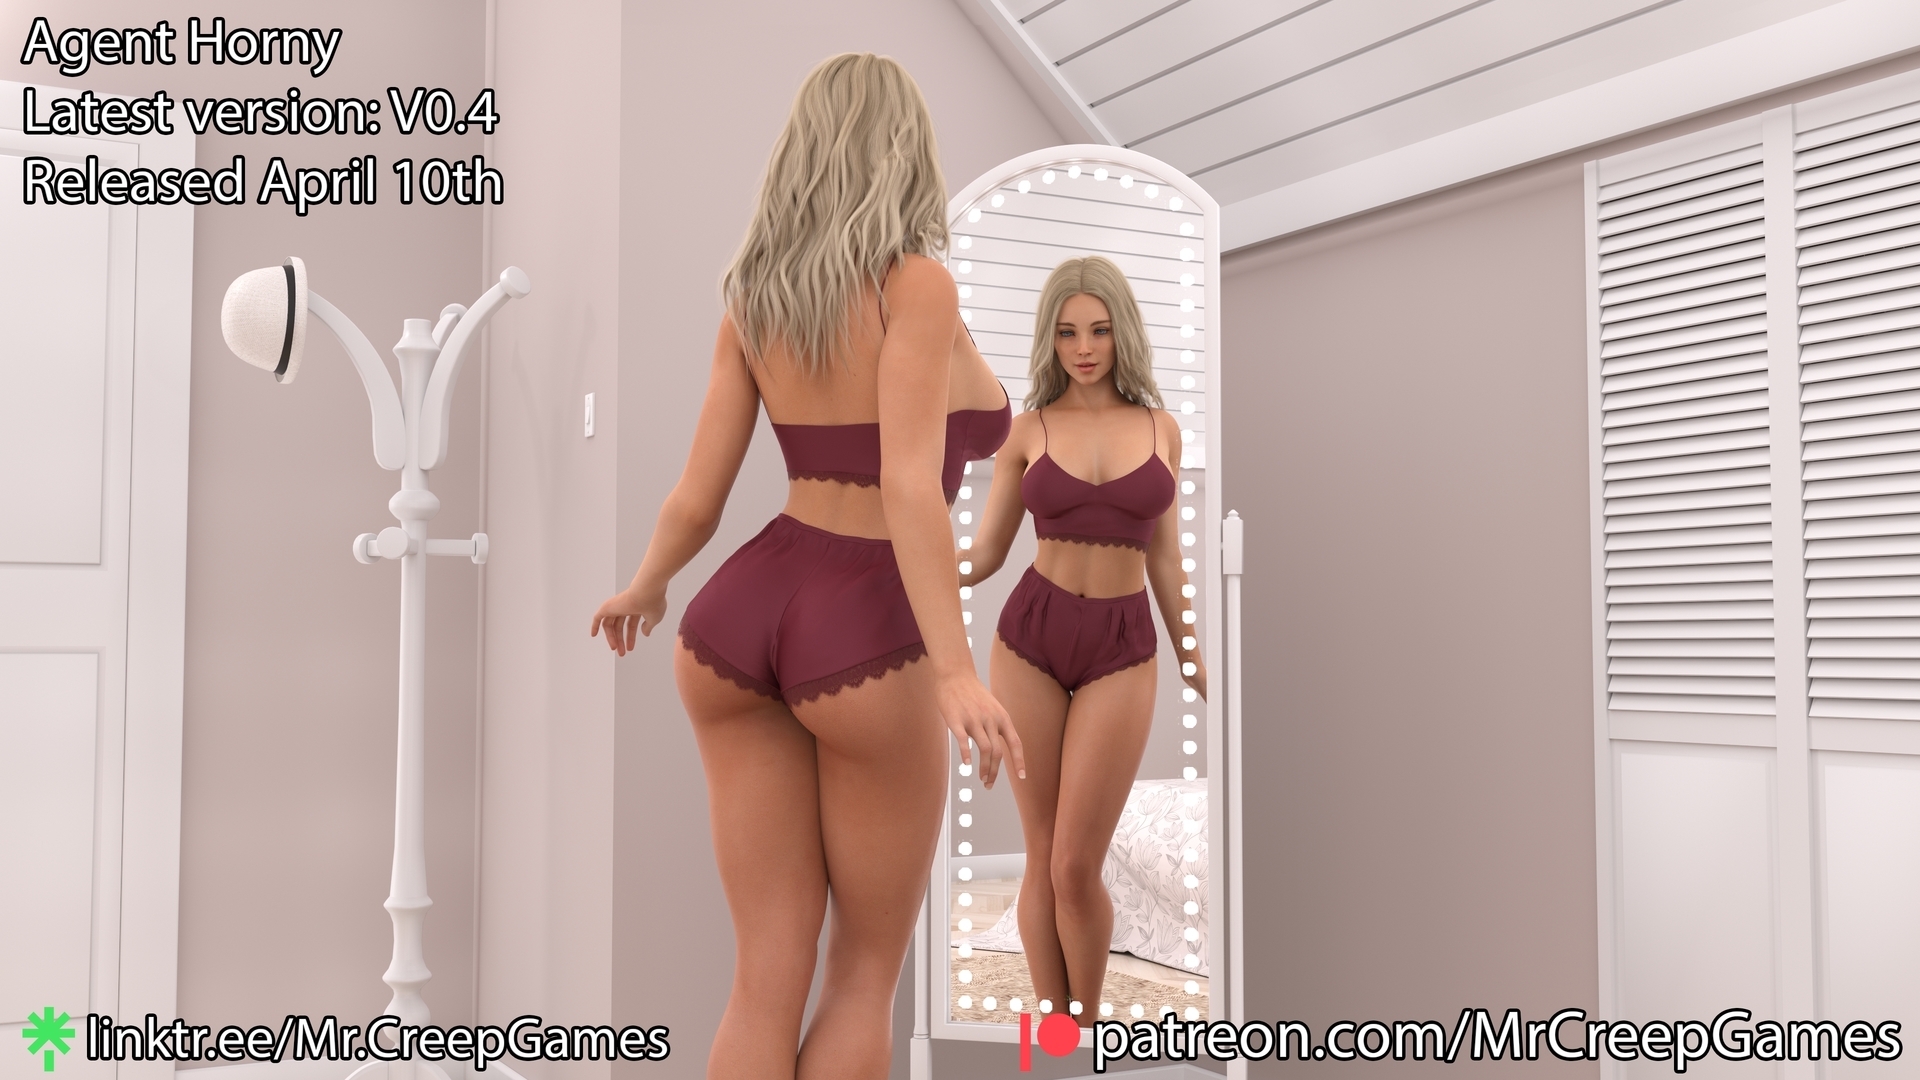 Agent Horny V0.4 Released  3d Porn 3d Girl Nsfw 3dnsfw Sexy Hot Nude Big boobs Pinup Pose Cute Teen